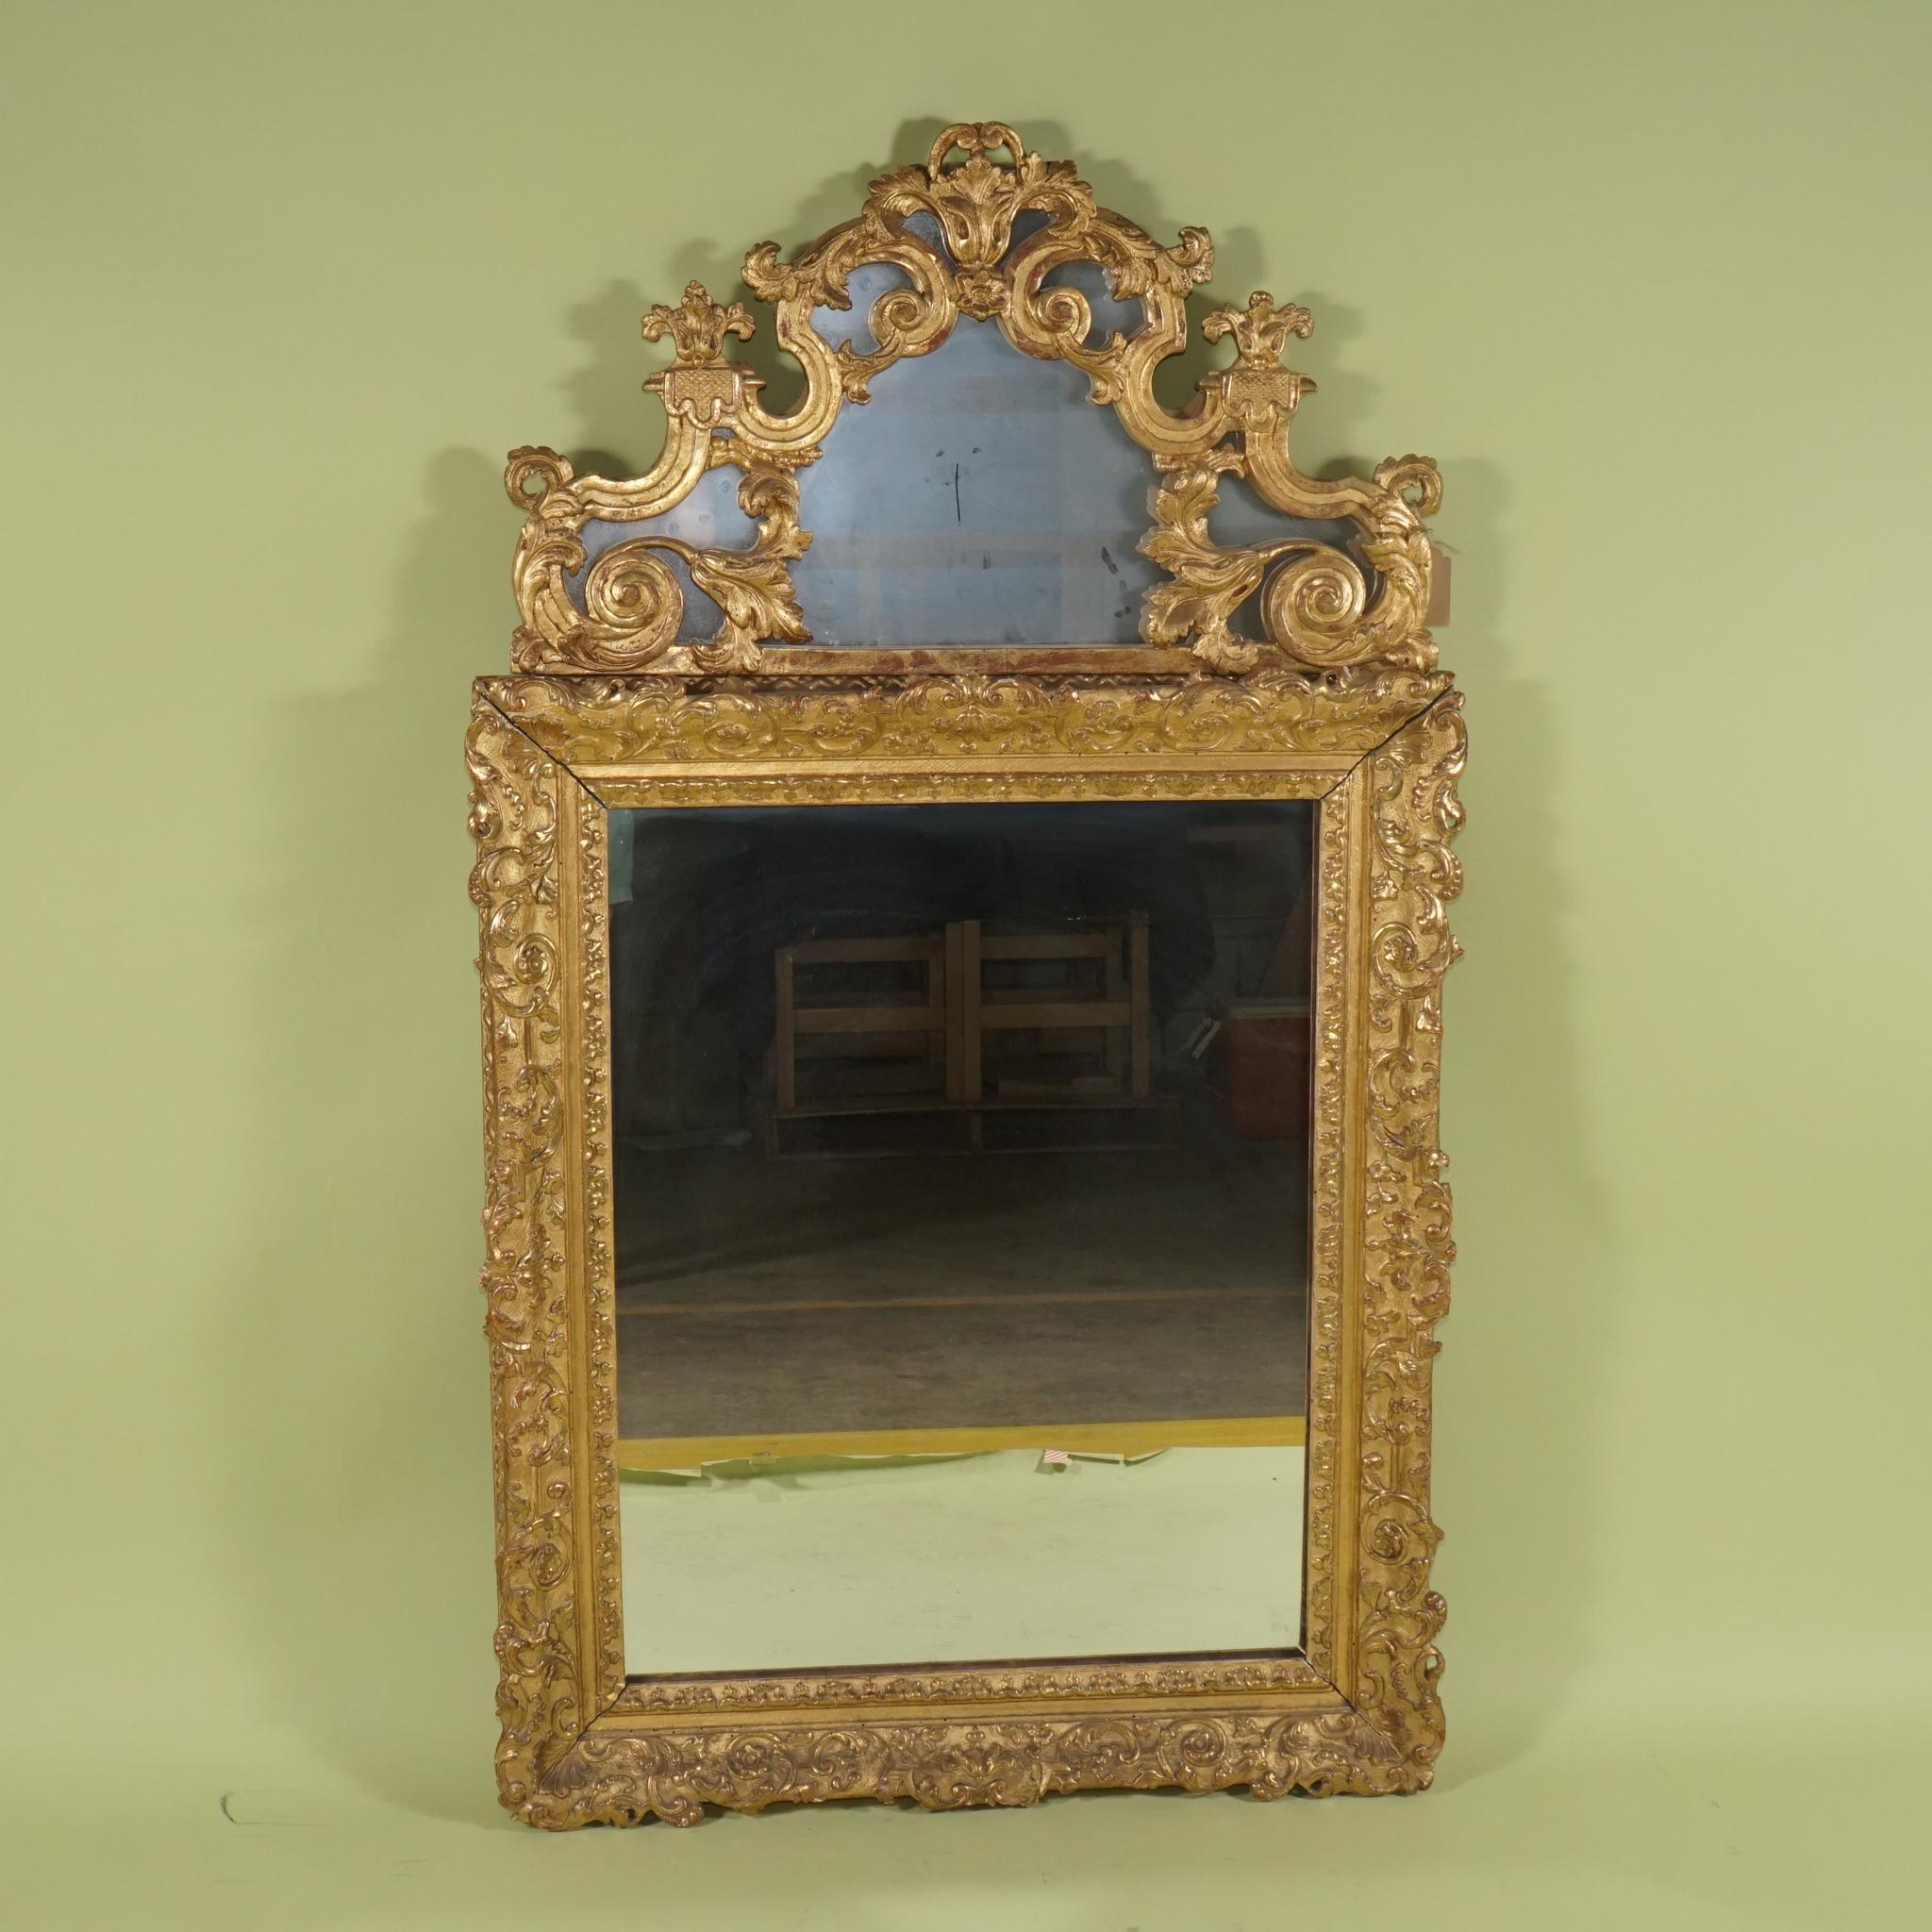 This fine frame from the French Regence period 1715 to 1723 to perhaps 50 years after that exact date is made completely of carved wood that has been gessoed and beautifully water gilded. Originally a frame and then sometime in the late 19th to